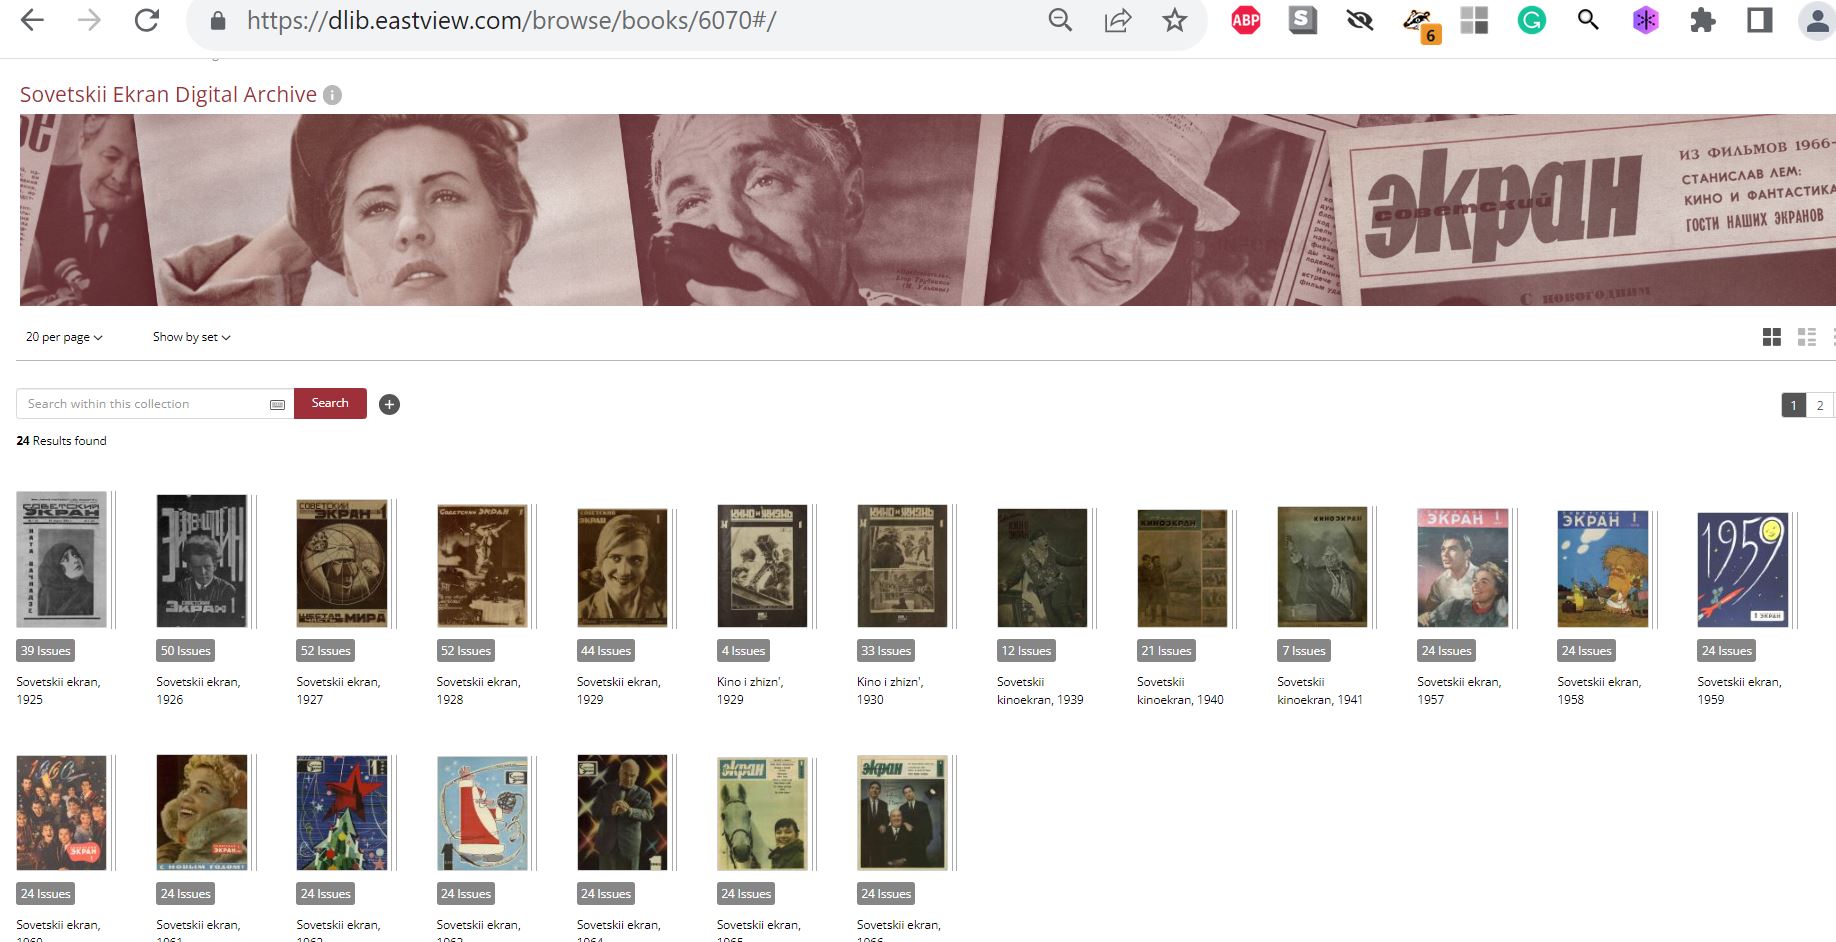 The landing page of the digital archive of Sovetskii Ekran aka Soviet Film Journal. The archive spans from 1925-1998.